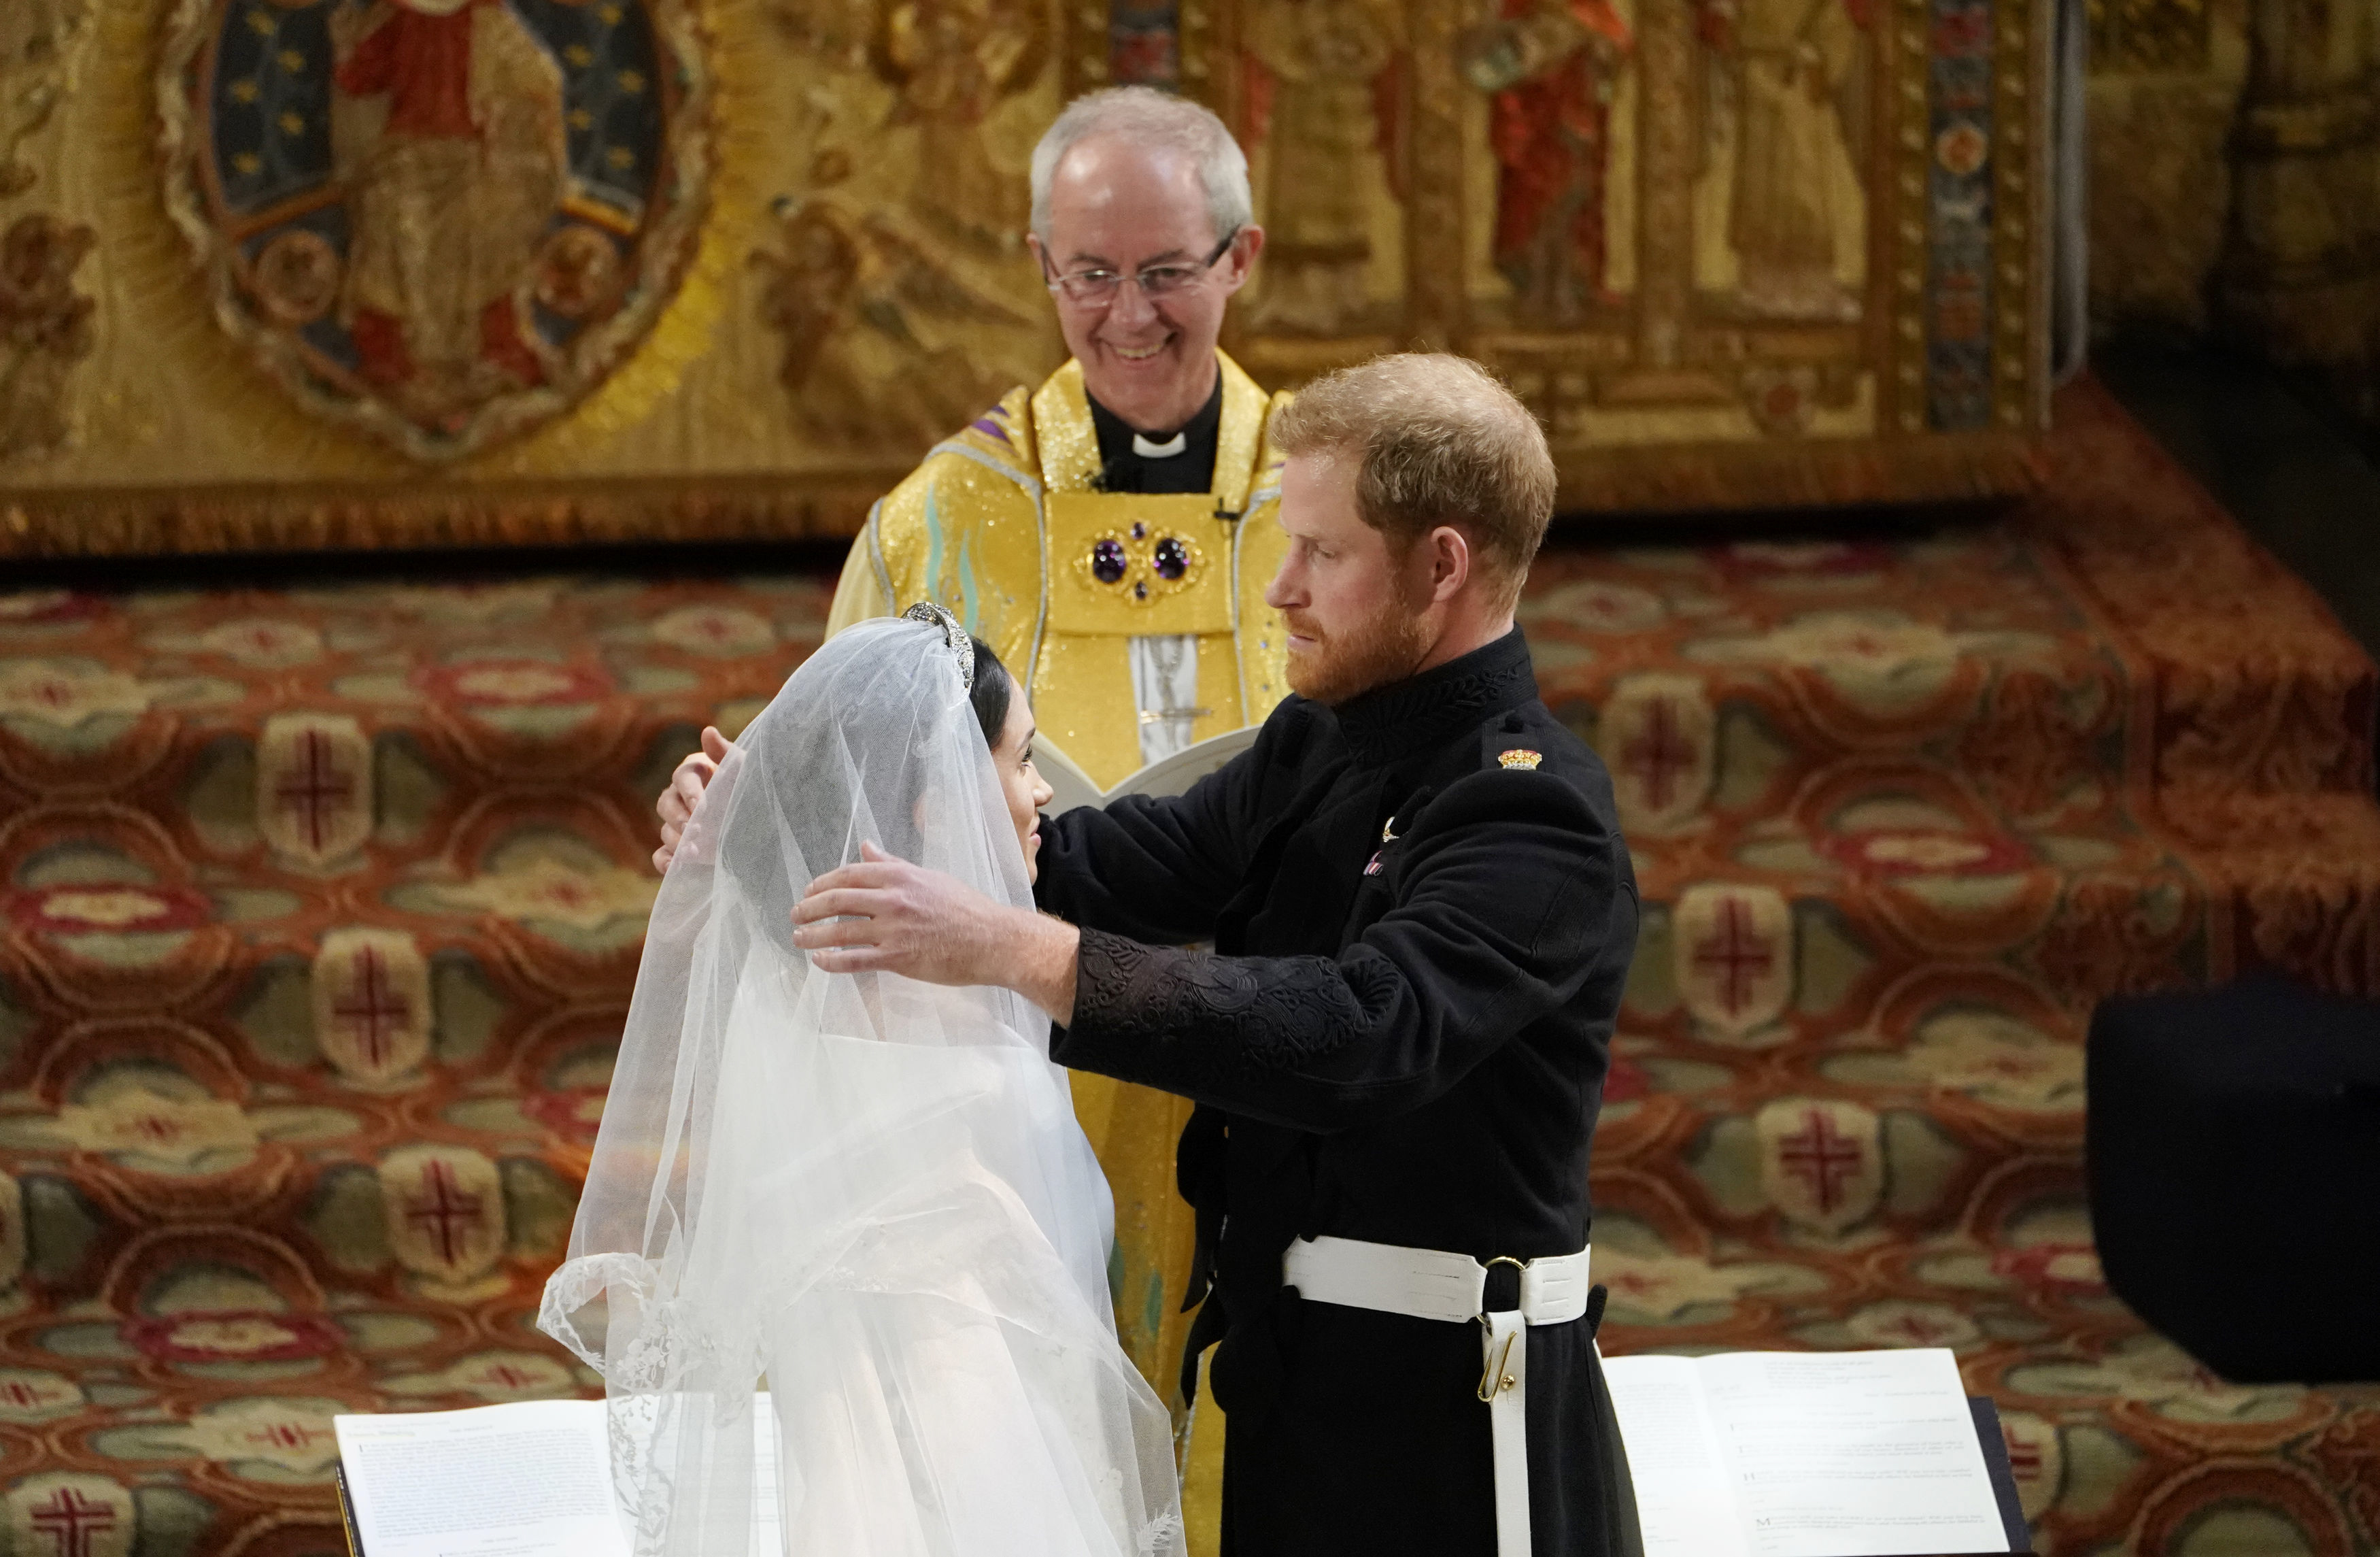 Prince Harry removes the veil of Meghan Markle at the altar before Archbishop of Canterbury Justin Welby